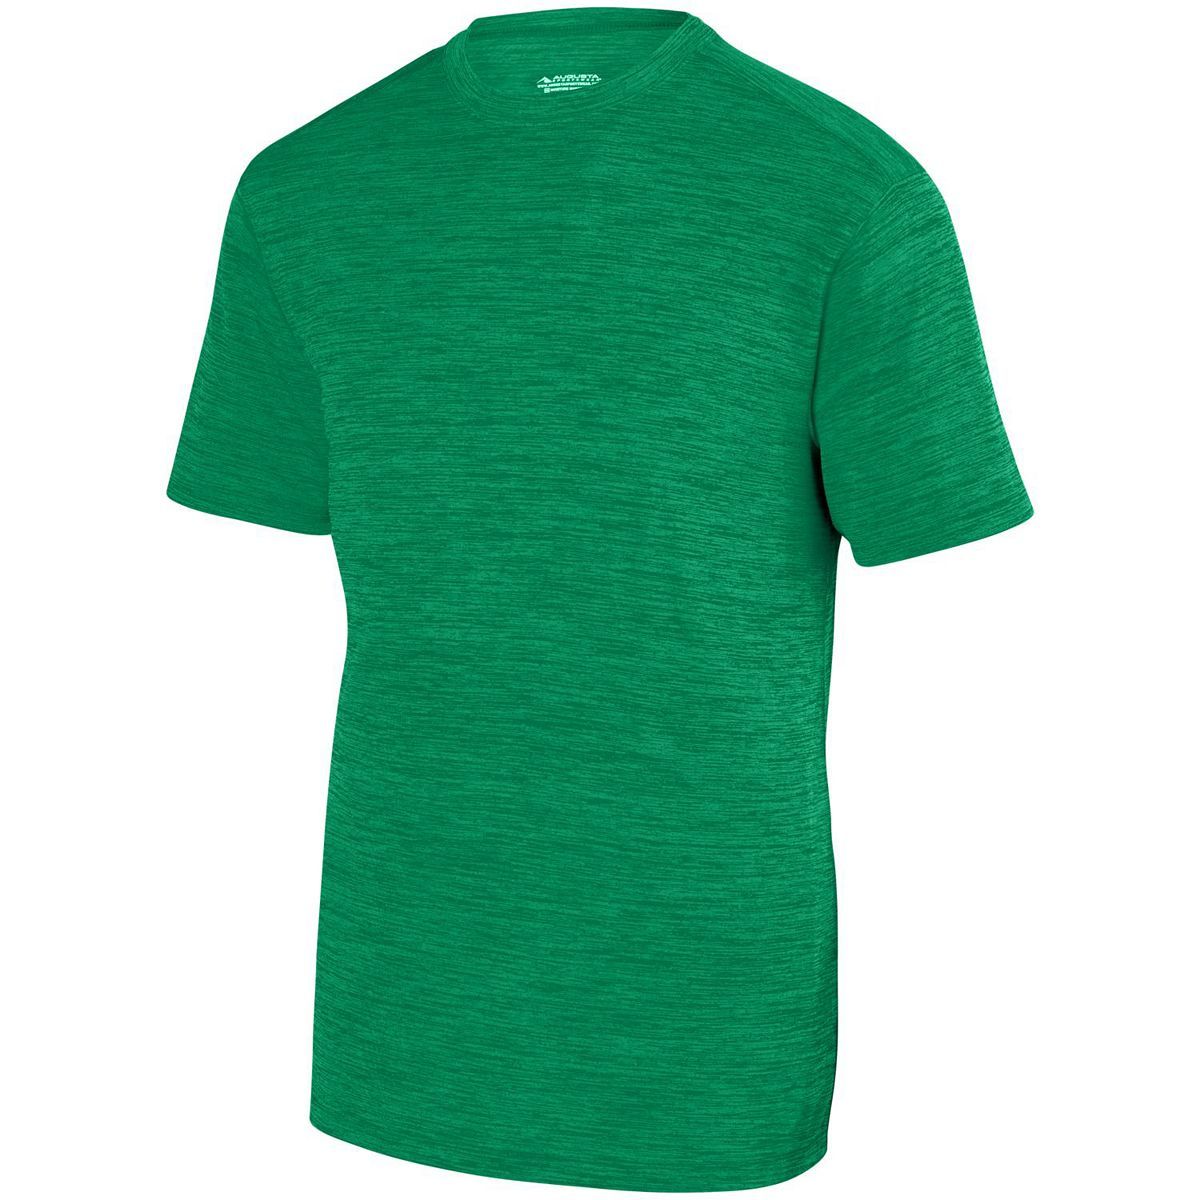 Augusta Sportswear Shadow Tonal Heather Training Tee in Kelly  -Part of the Adult, Adult-Tee-Shirt, T-Shirts, Augusta-Products, Shirts, Tonal-Fleece-Collection product lines at KanaleyCreations.com